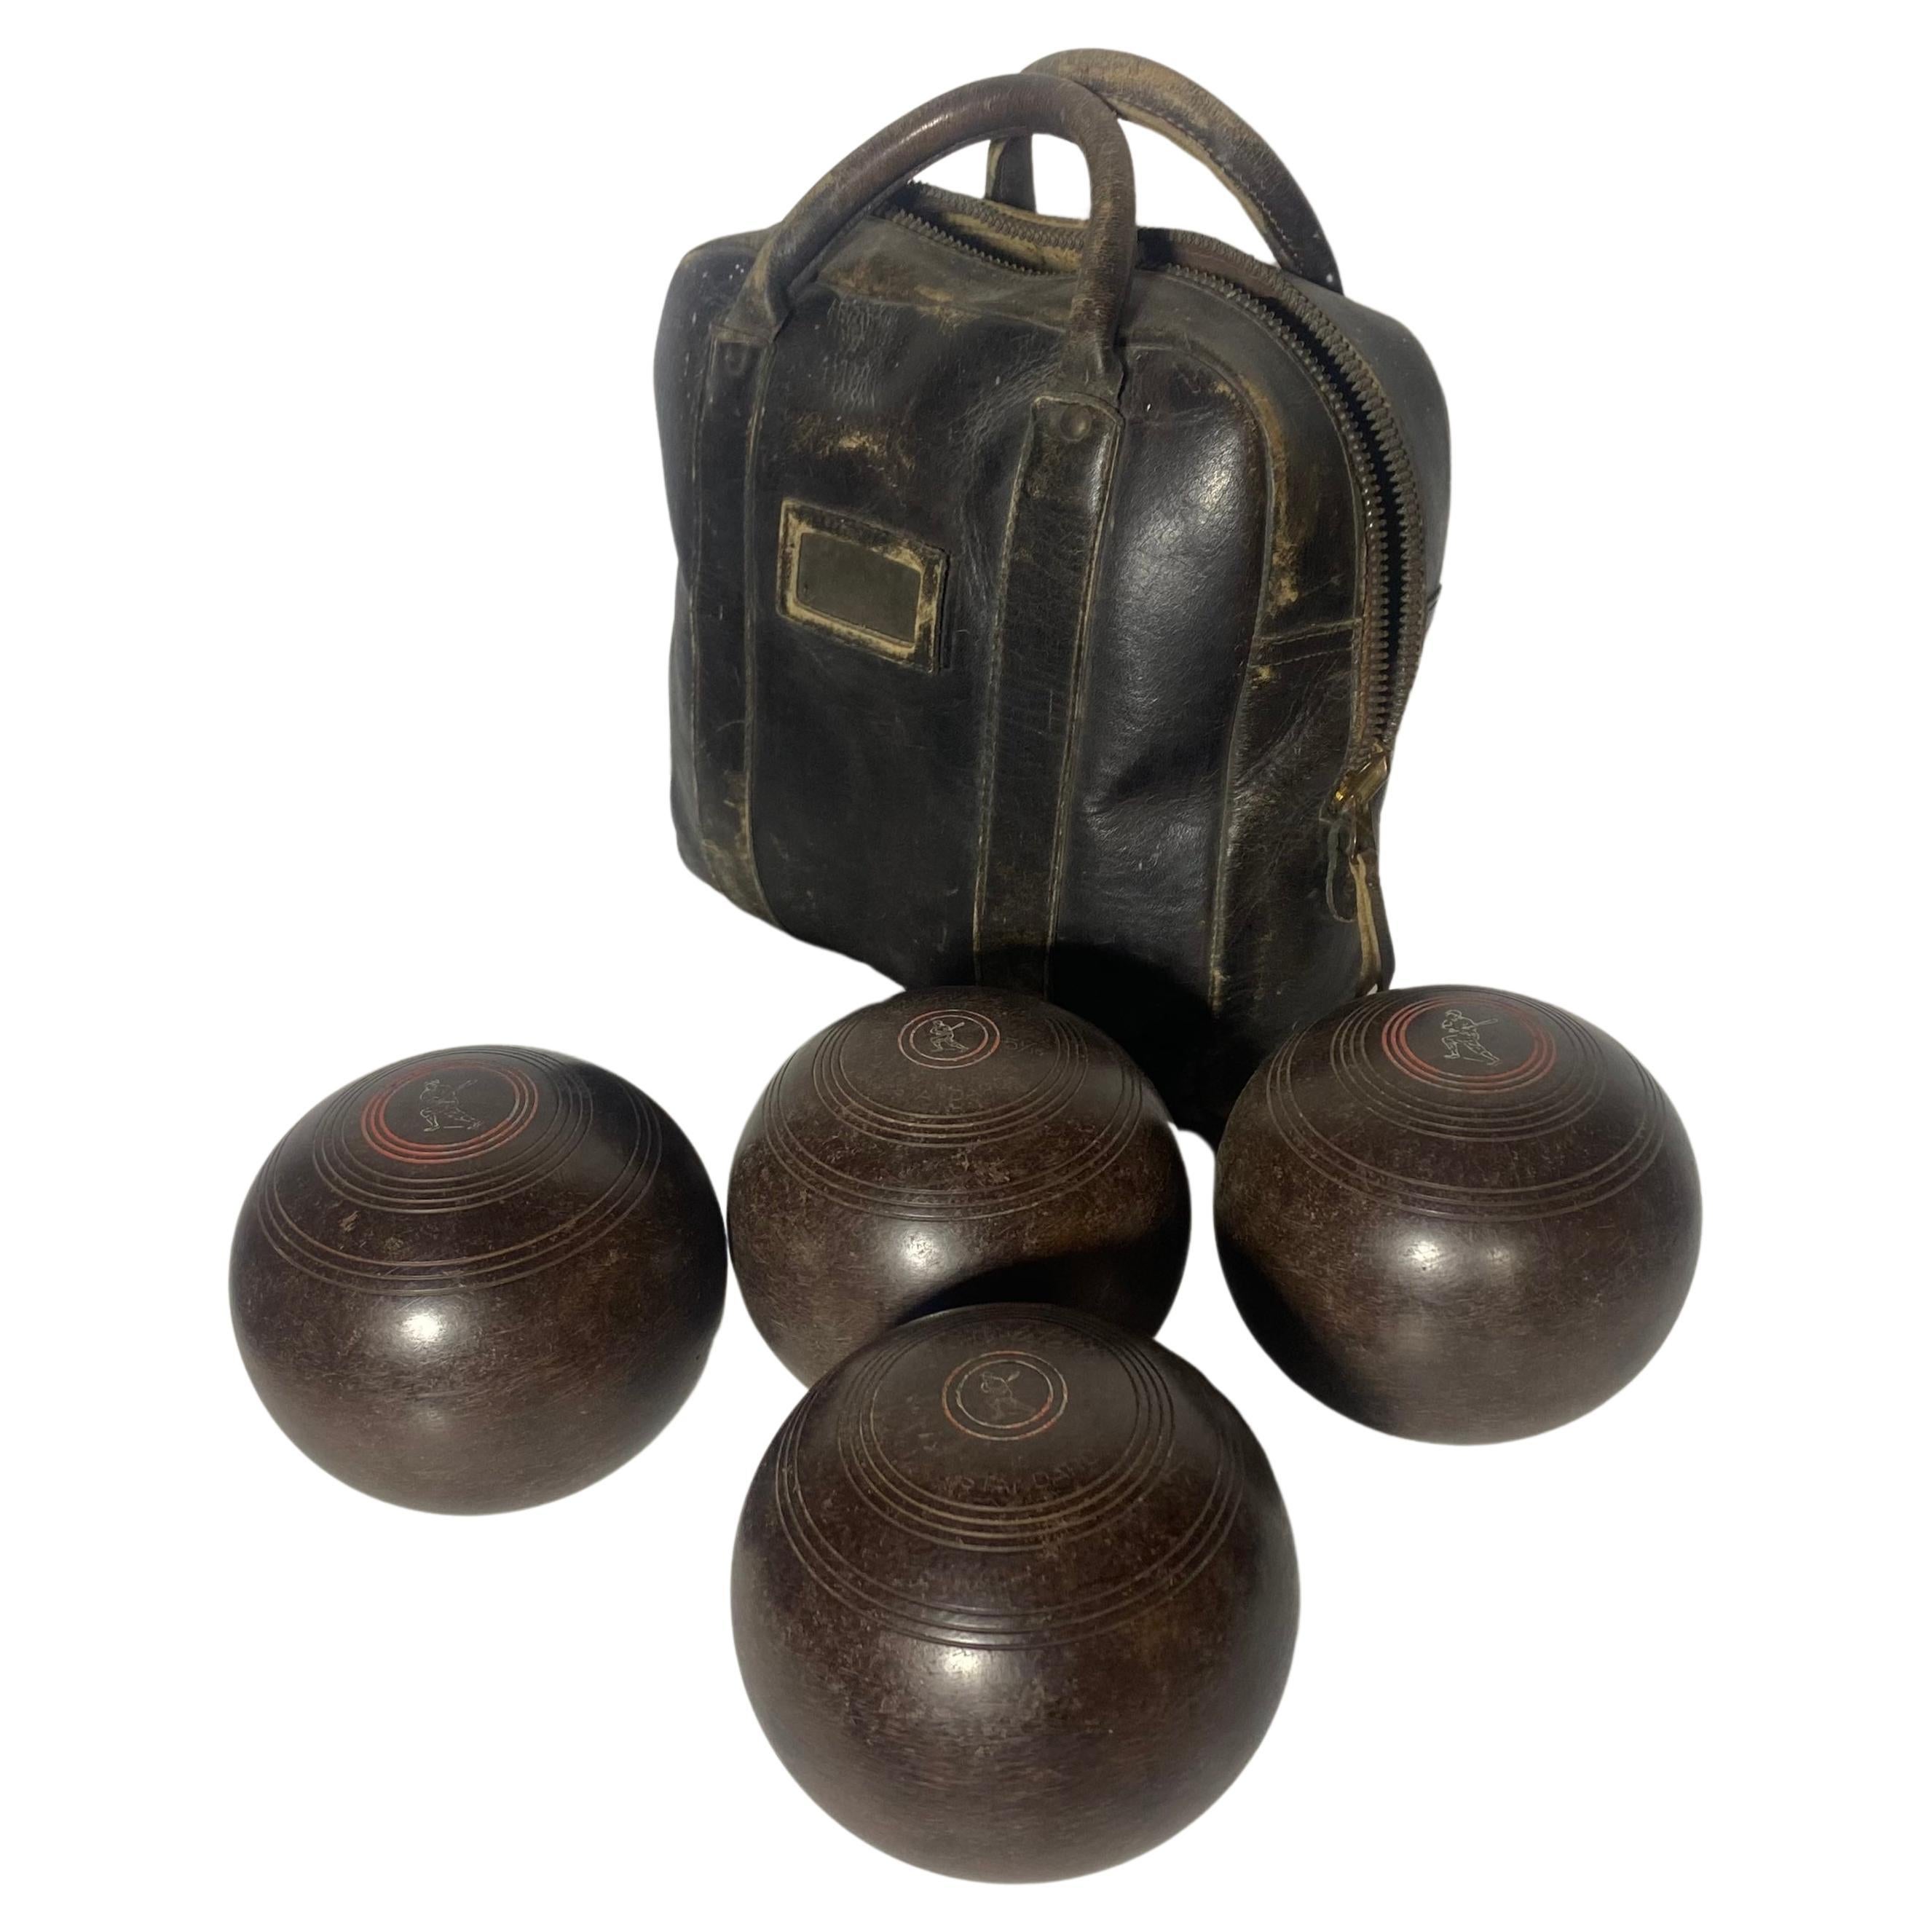 1930s /40s W.D. Hensell & Sons Bocci (Lawn) Balls with original leather bag For Sale